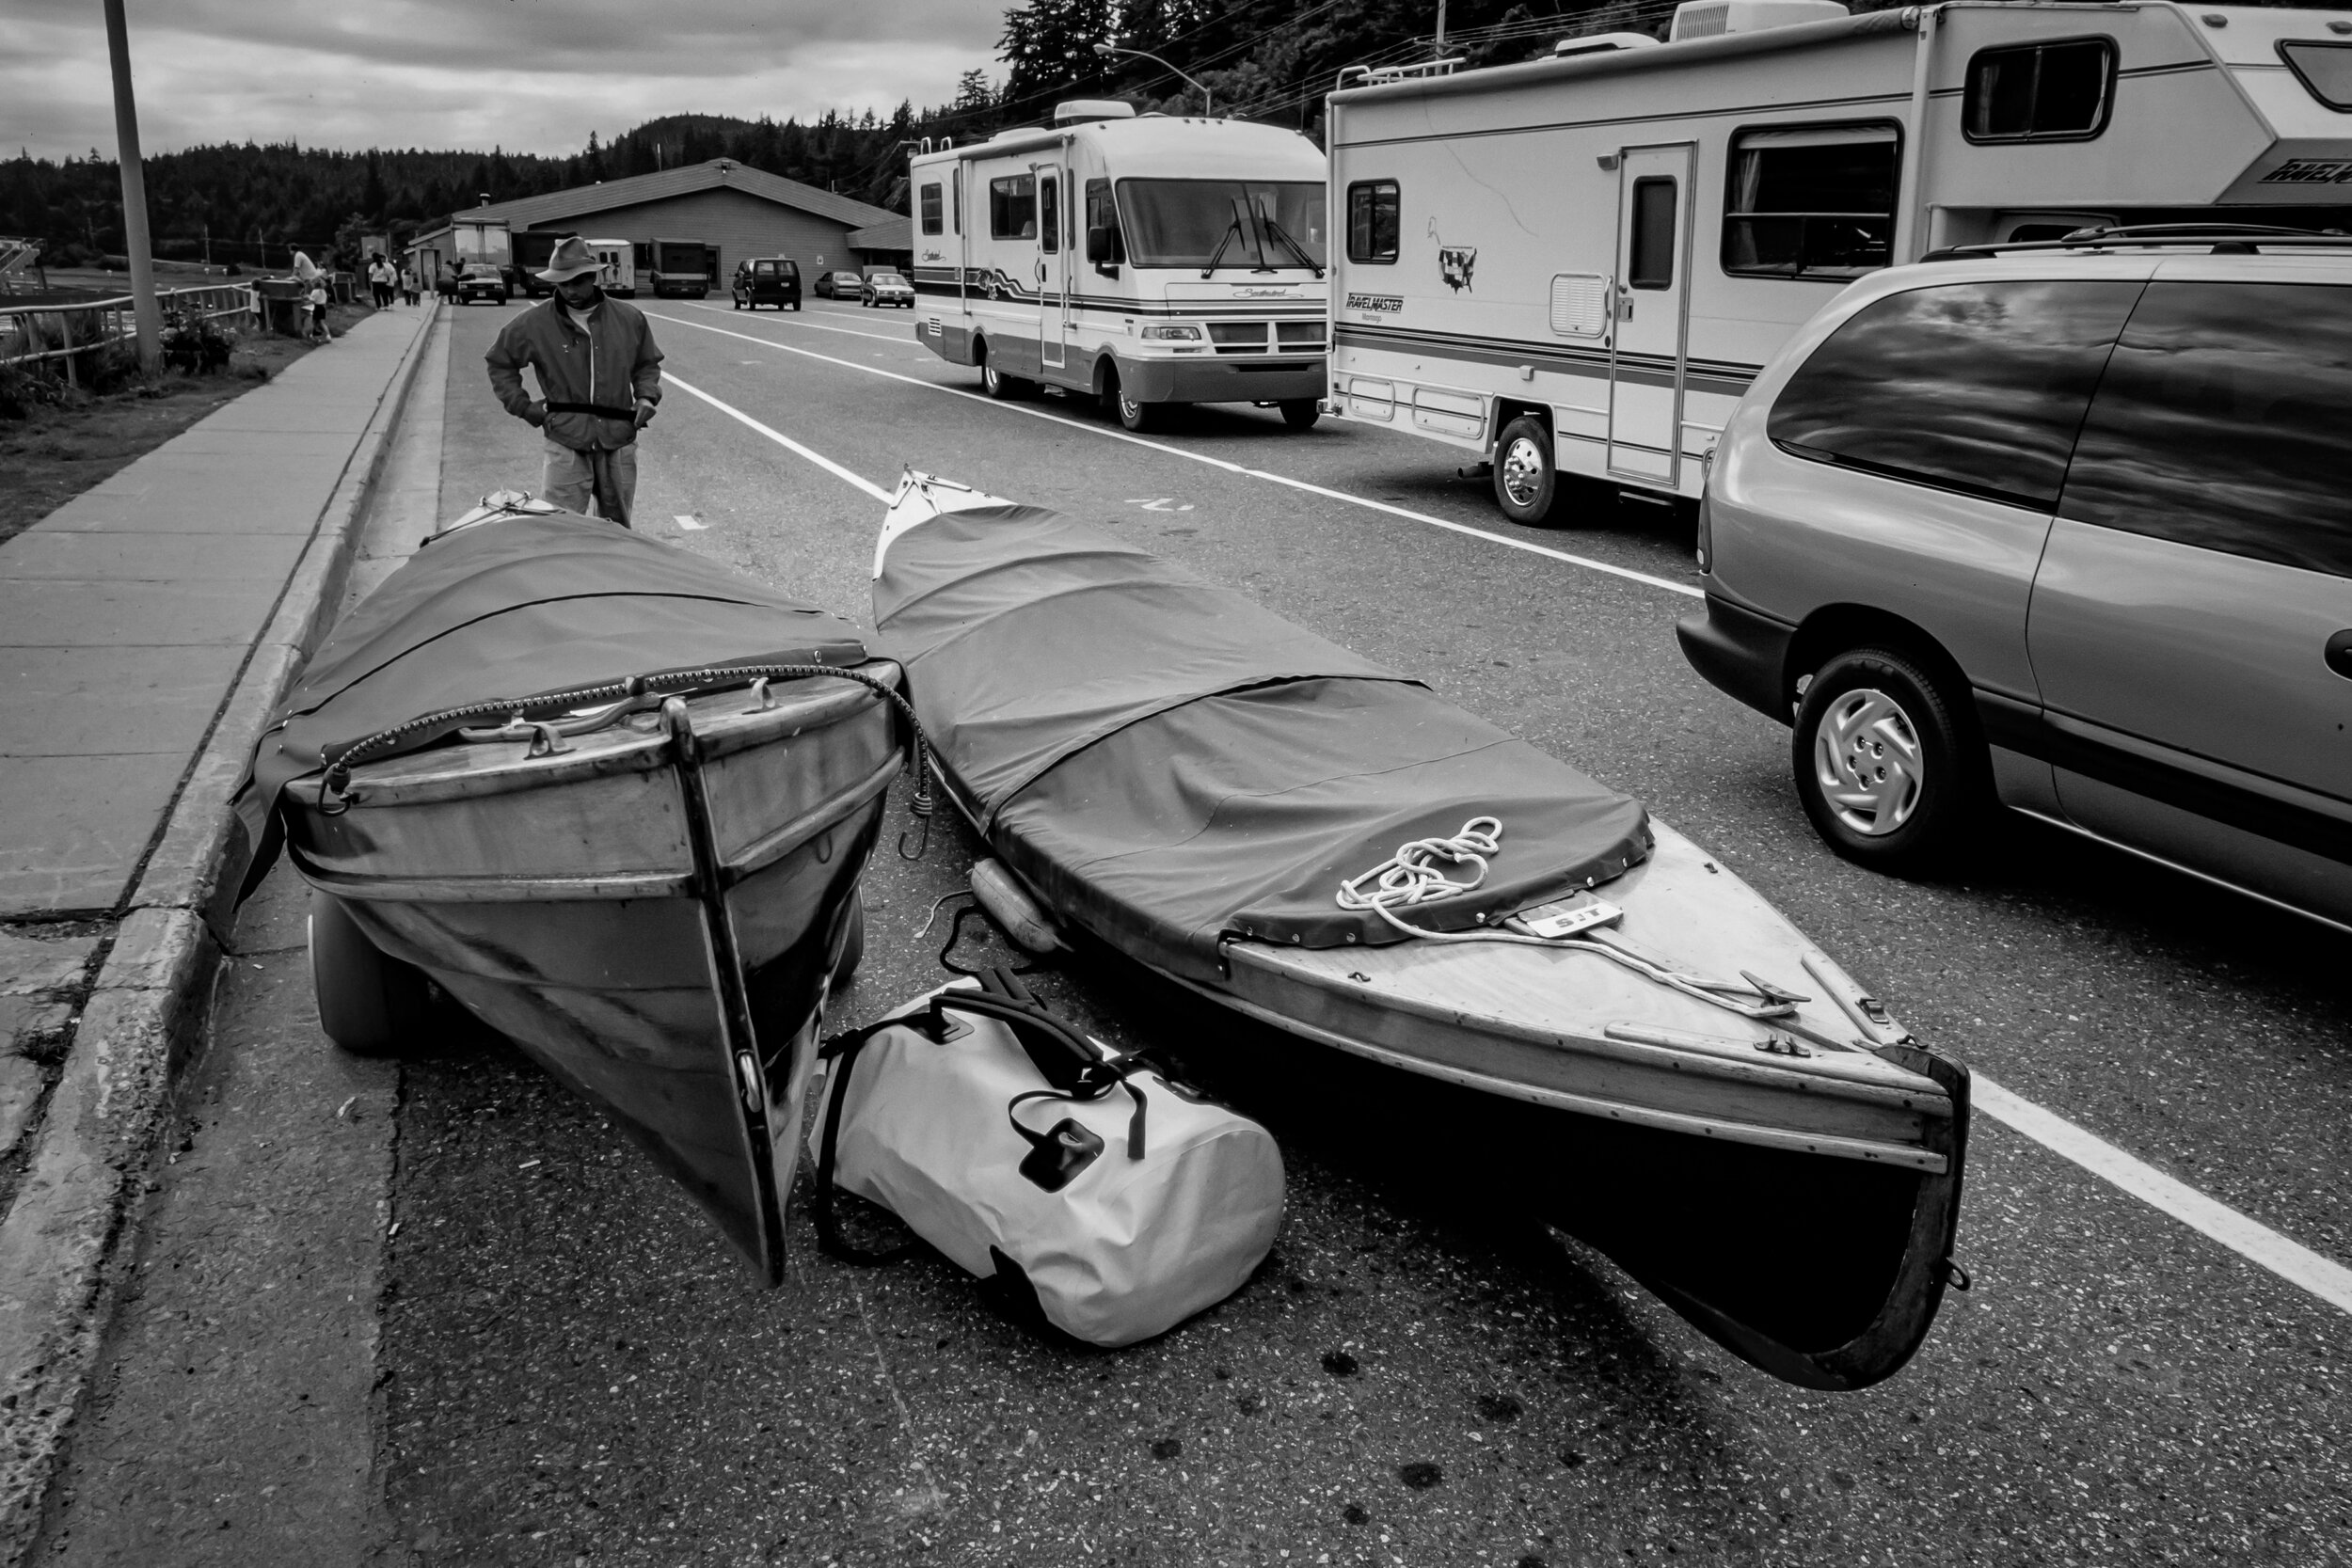  We were an odd site waiting to board the Alaskan Maritime Ferry with wooden boats on dollies and not an RV.  